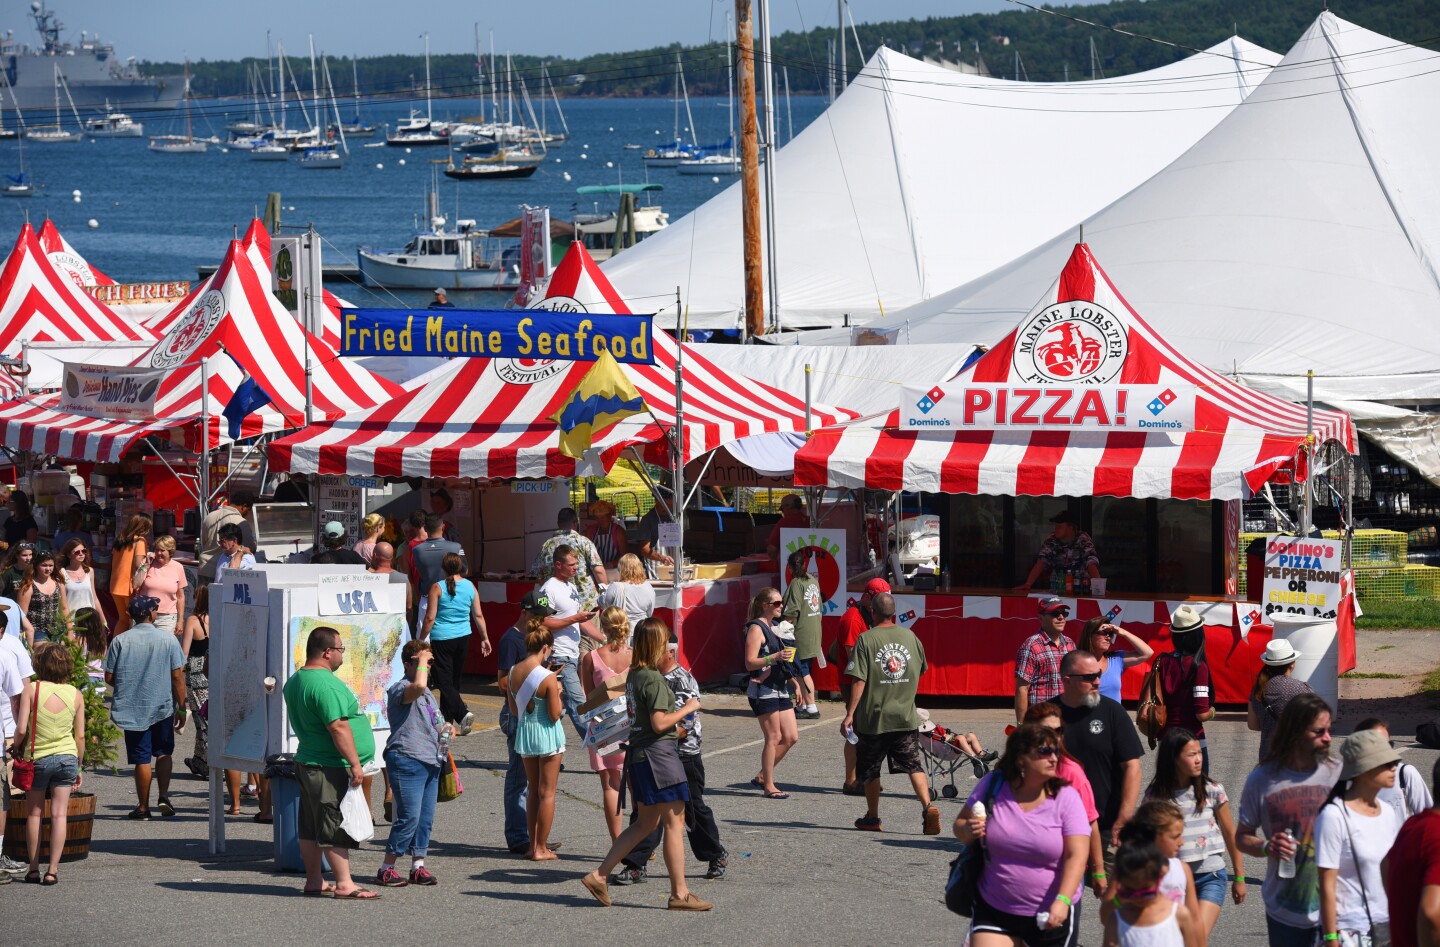 <h2>10. Rockland, Maine</h2> <p><b>August is great for: </b>Forgetting the summer diet for the best possible reasons.</p> <p>For five days, Rockland becomes a crustacean celebration with the <a class="Link" href="https://mainelobsterfestival.com/" rel="noopener">Maine Lobster Festival</a> (this year, from July 31 to August 4), with more than 70,000 visitors to gorge on freshly caught, fresh-cooking lobster overlooking Penobscot Bay: Take your pick between turnovers, rolls, salad, bisques, deep fried dumplings, and more.</p> <p>There’s more to the bash, with a cooking festival for those keen to show off their kitchen prep schools, and a <a class="Link" href="https://mainelobsterfestival.com/main-events/road-race-fun-run-and-walk/" rel="noopener">10K road race</a>. The highlight, though, is Sunday afternoon’s <a class="Link" href="https://mainelobsterfestival.com/main-events/the-great-international-lobster-crate-race/" rel="noopener">Great Crate Race</a>, where anyone foolhardy and athletic enough can sign up to try to scamper across 50 lobster traps strung together like a bobbing obstacle course across the harbor. This is a true community effort, staffed almost entirely by local volunteers and run by a nonprofit that siphons all the money made back into Midcoast Maine community programs.</p>  <h3>Where to stay: 250 Main Hotel</h3>  <ul>   <li><b>Book now: </b><a class="Link" href="https://www.250mainhotel.com/" rel="noopener">250 Main Hotel</a></li>  </ul> <p>The 26-room hotel right in the heart of town means you can walk to or from the festival (and dry off more quickly if you tumble during the Crate Race). It’s refreshing contemporary, featuring bright accent colors and flat screen TVs.</p>  <h3>How to get to Rockland</h3>  <p>The only flight to Rockland’s airport is operated by regional carrier Cape Air, from Boston. Hacking the trip, head to Portland, ME, which has seasonal service to a range of cities including Washington D.C., Baltimore, and Charlotte. Then drive up to Rockland, a scenic detour that takes around 90 minutes.</p>